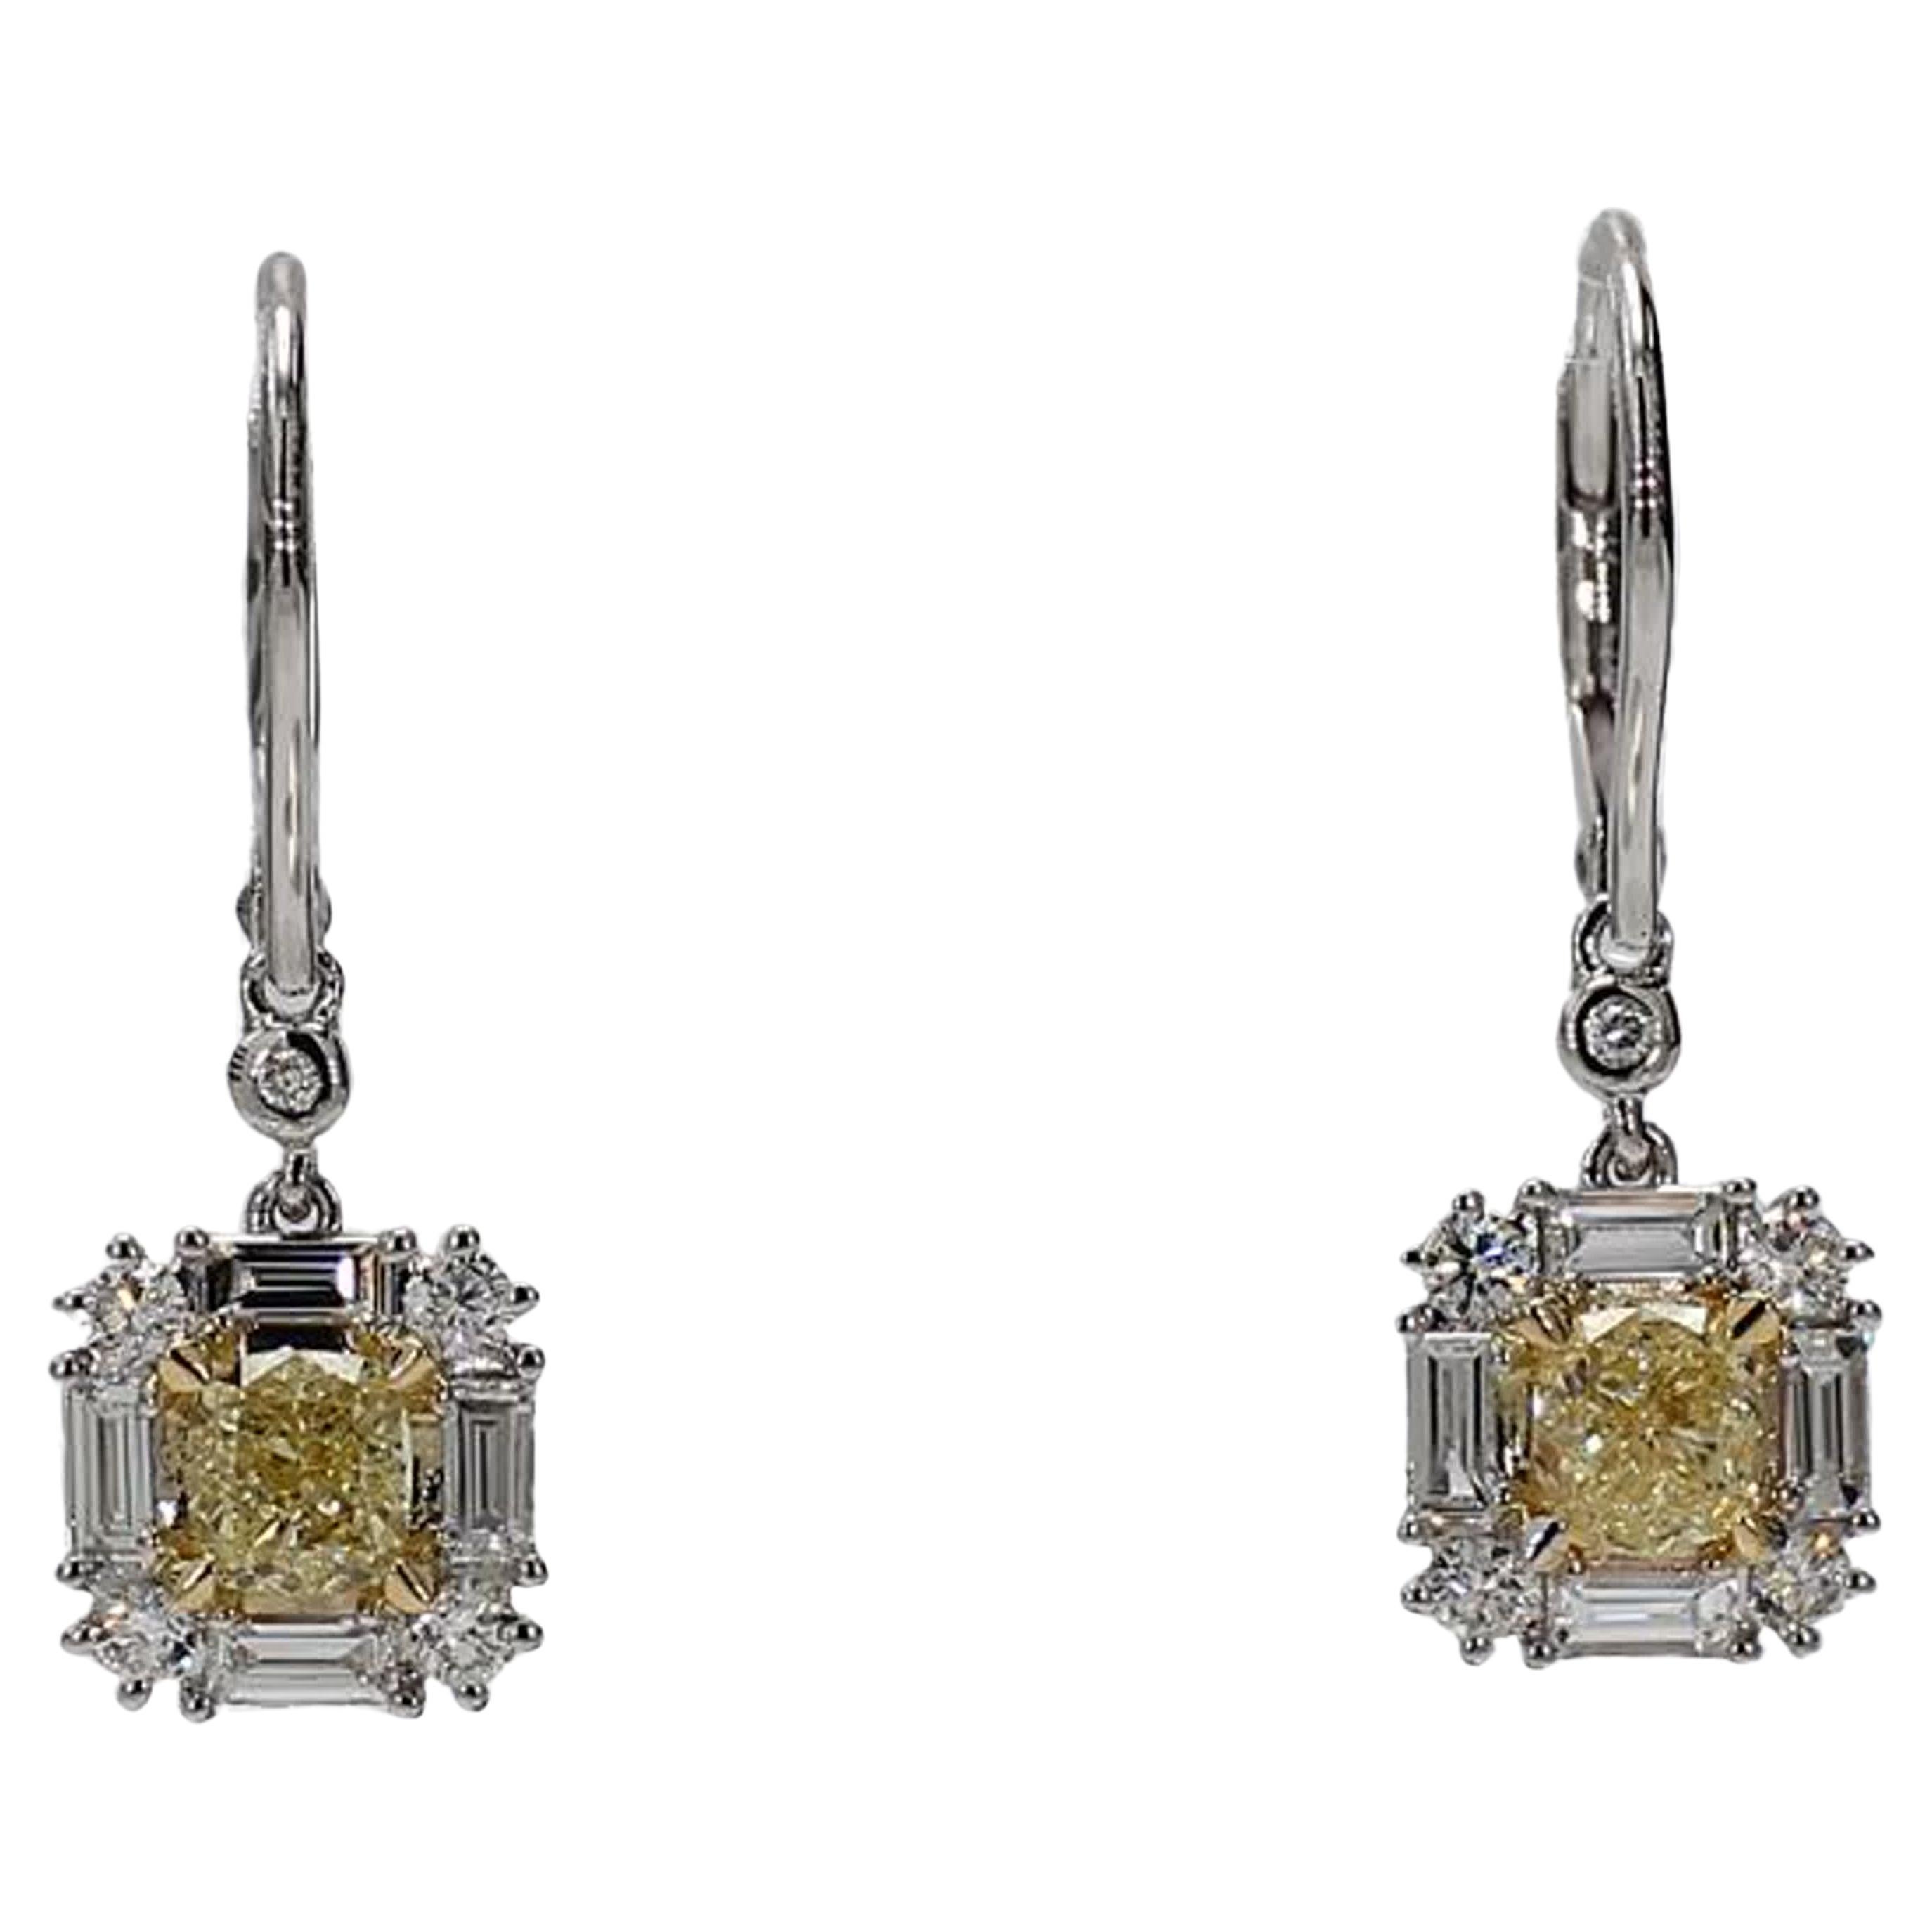 Natural Yellow Cushion and White Diamond 1.81 Carat TW Gold Drop Earrings